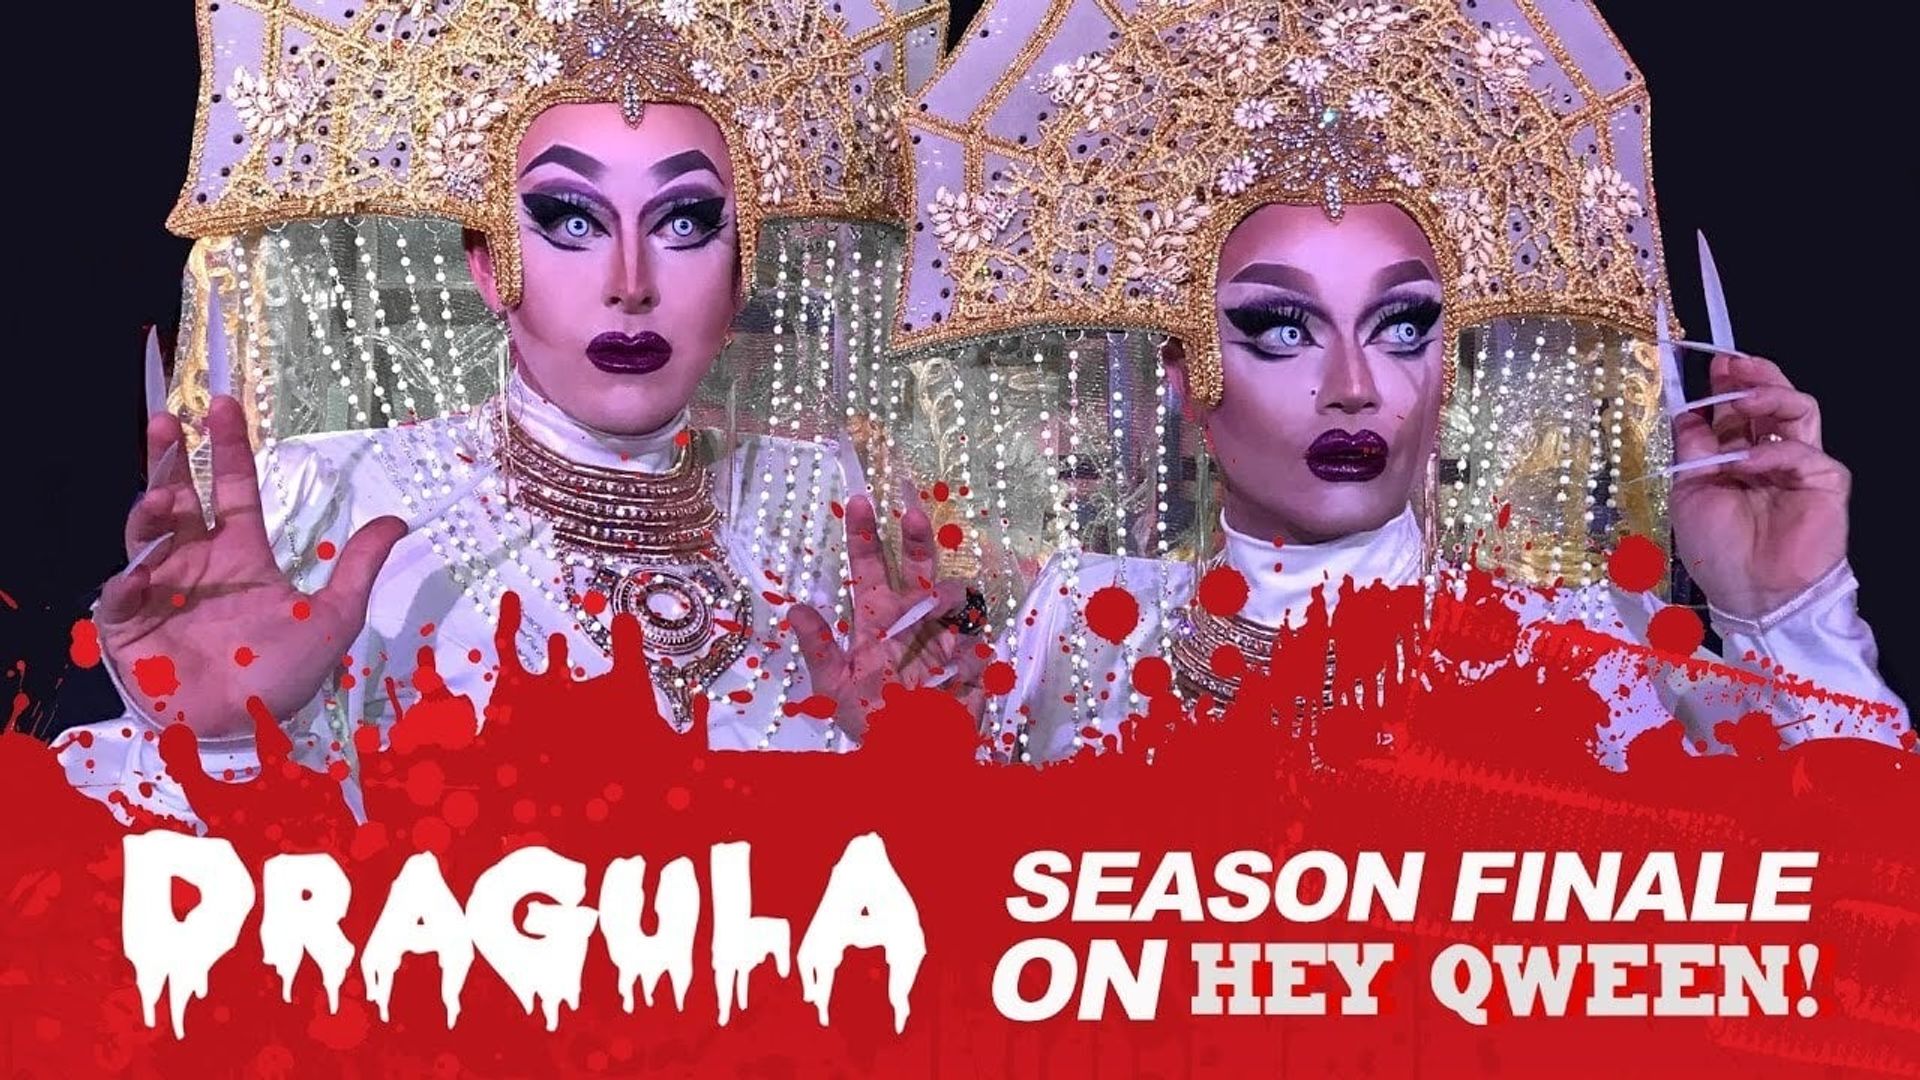 The Boulet Brothers' Dragula background